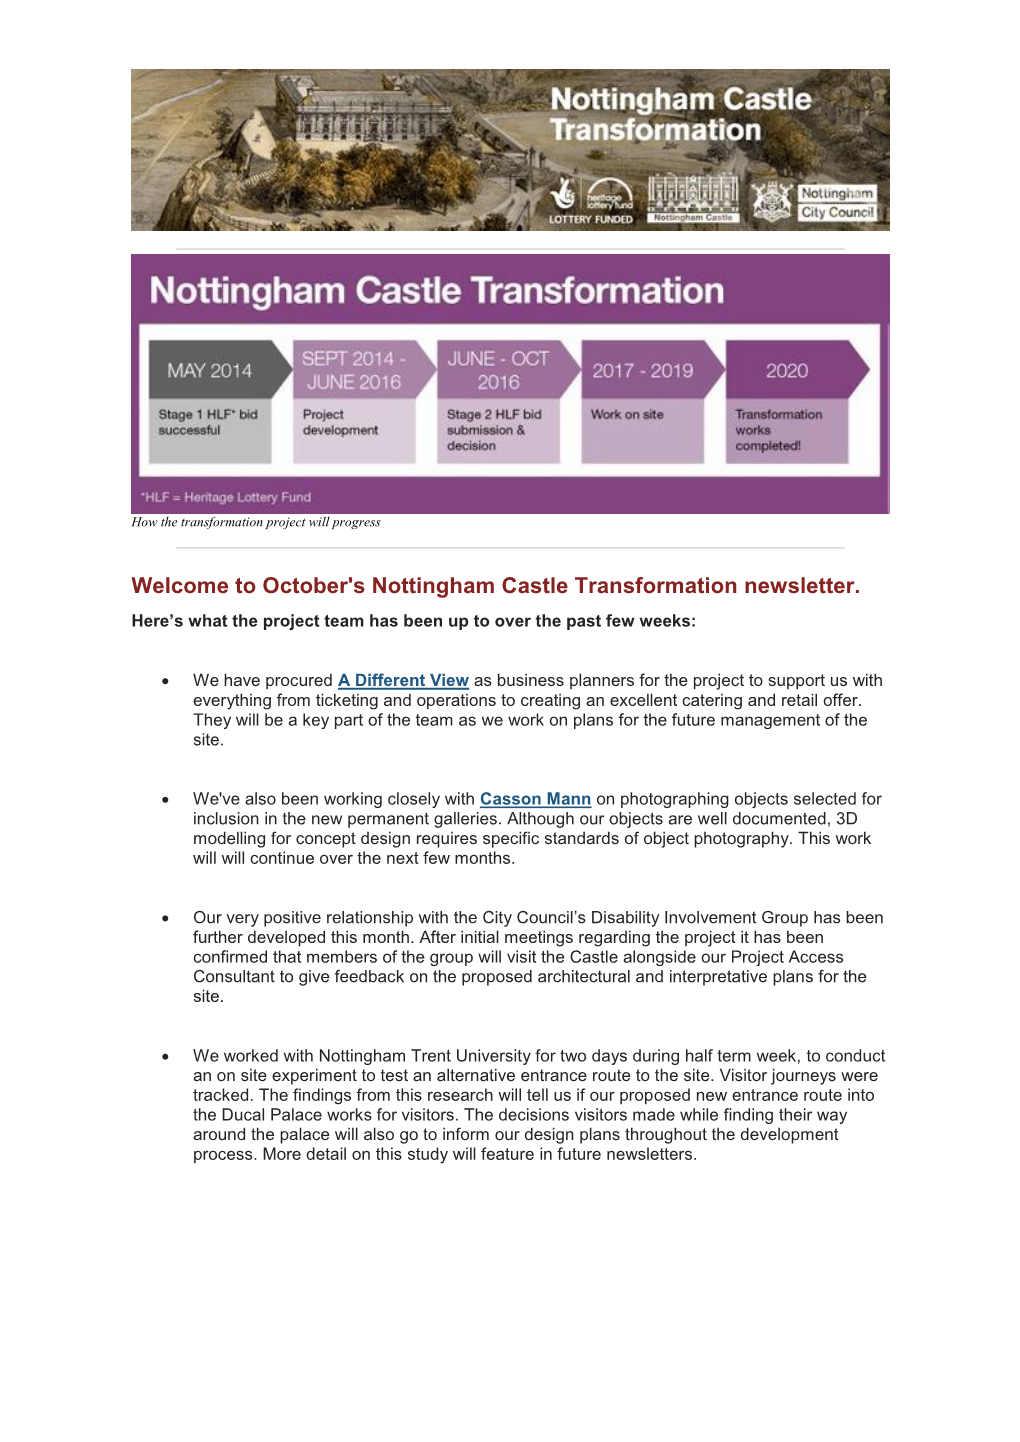 Welcome to October's Nottingham Castle Transformation Newsletter. Here’S What the Project Team Has Been up to Over the Past Few Weeks